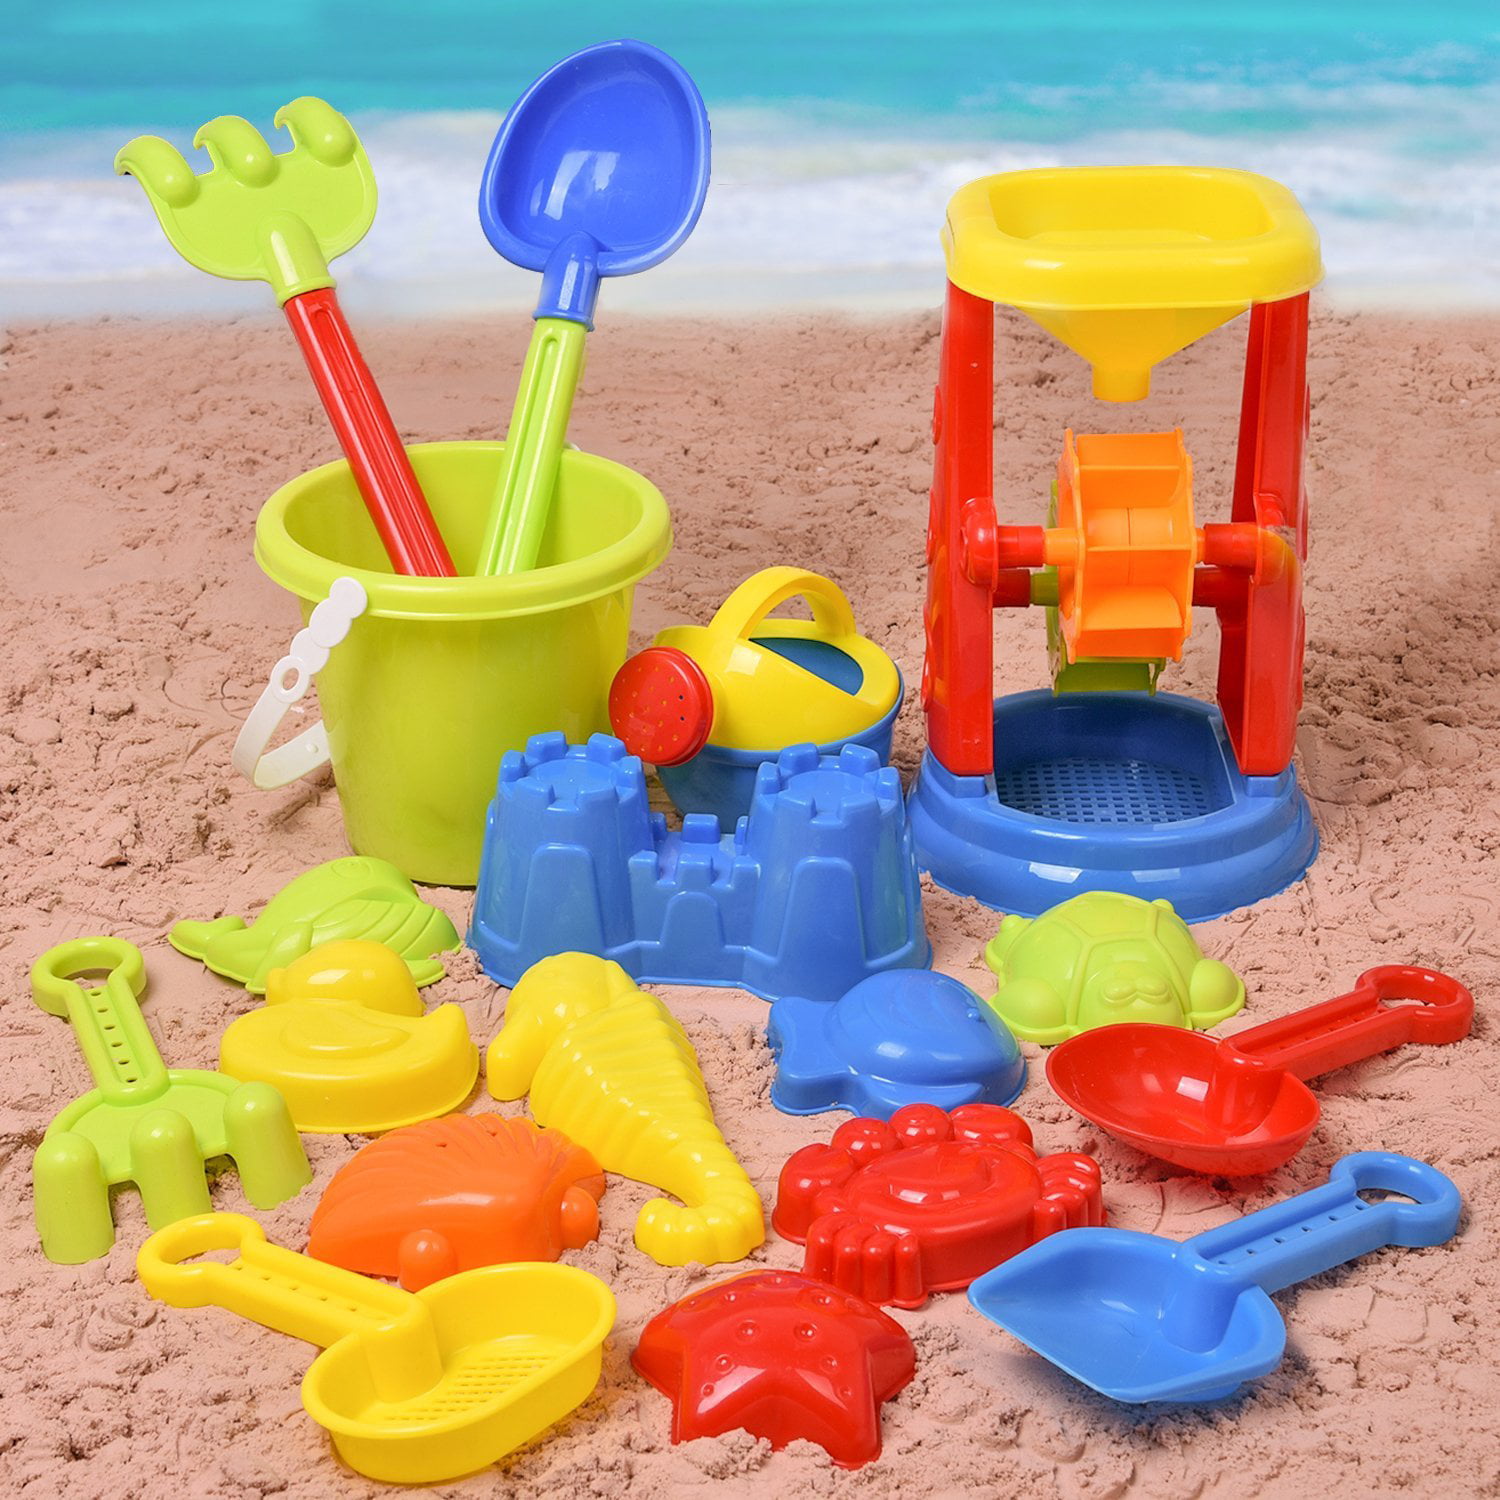 TOYANDONA Kids Beach Sand Toy Set Educational Sandbox Toy with Sand Truck Watering Can Shovel Rake for Outdoor Coastal Pool Activities Party Supplies 